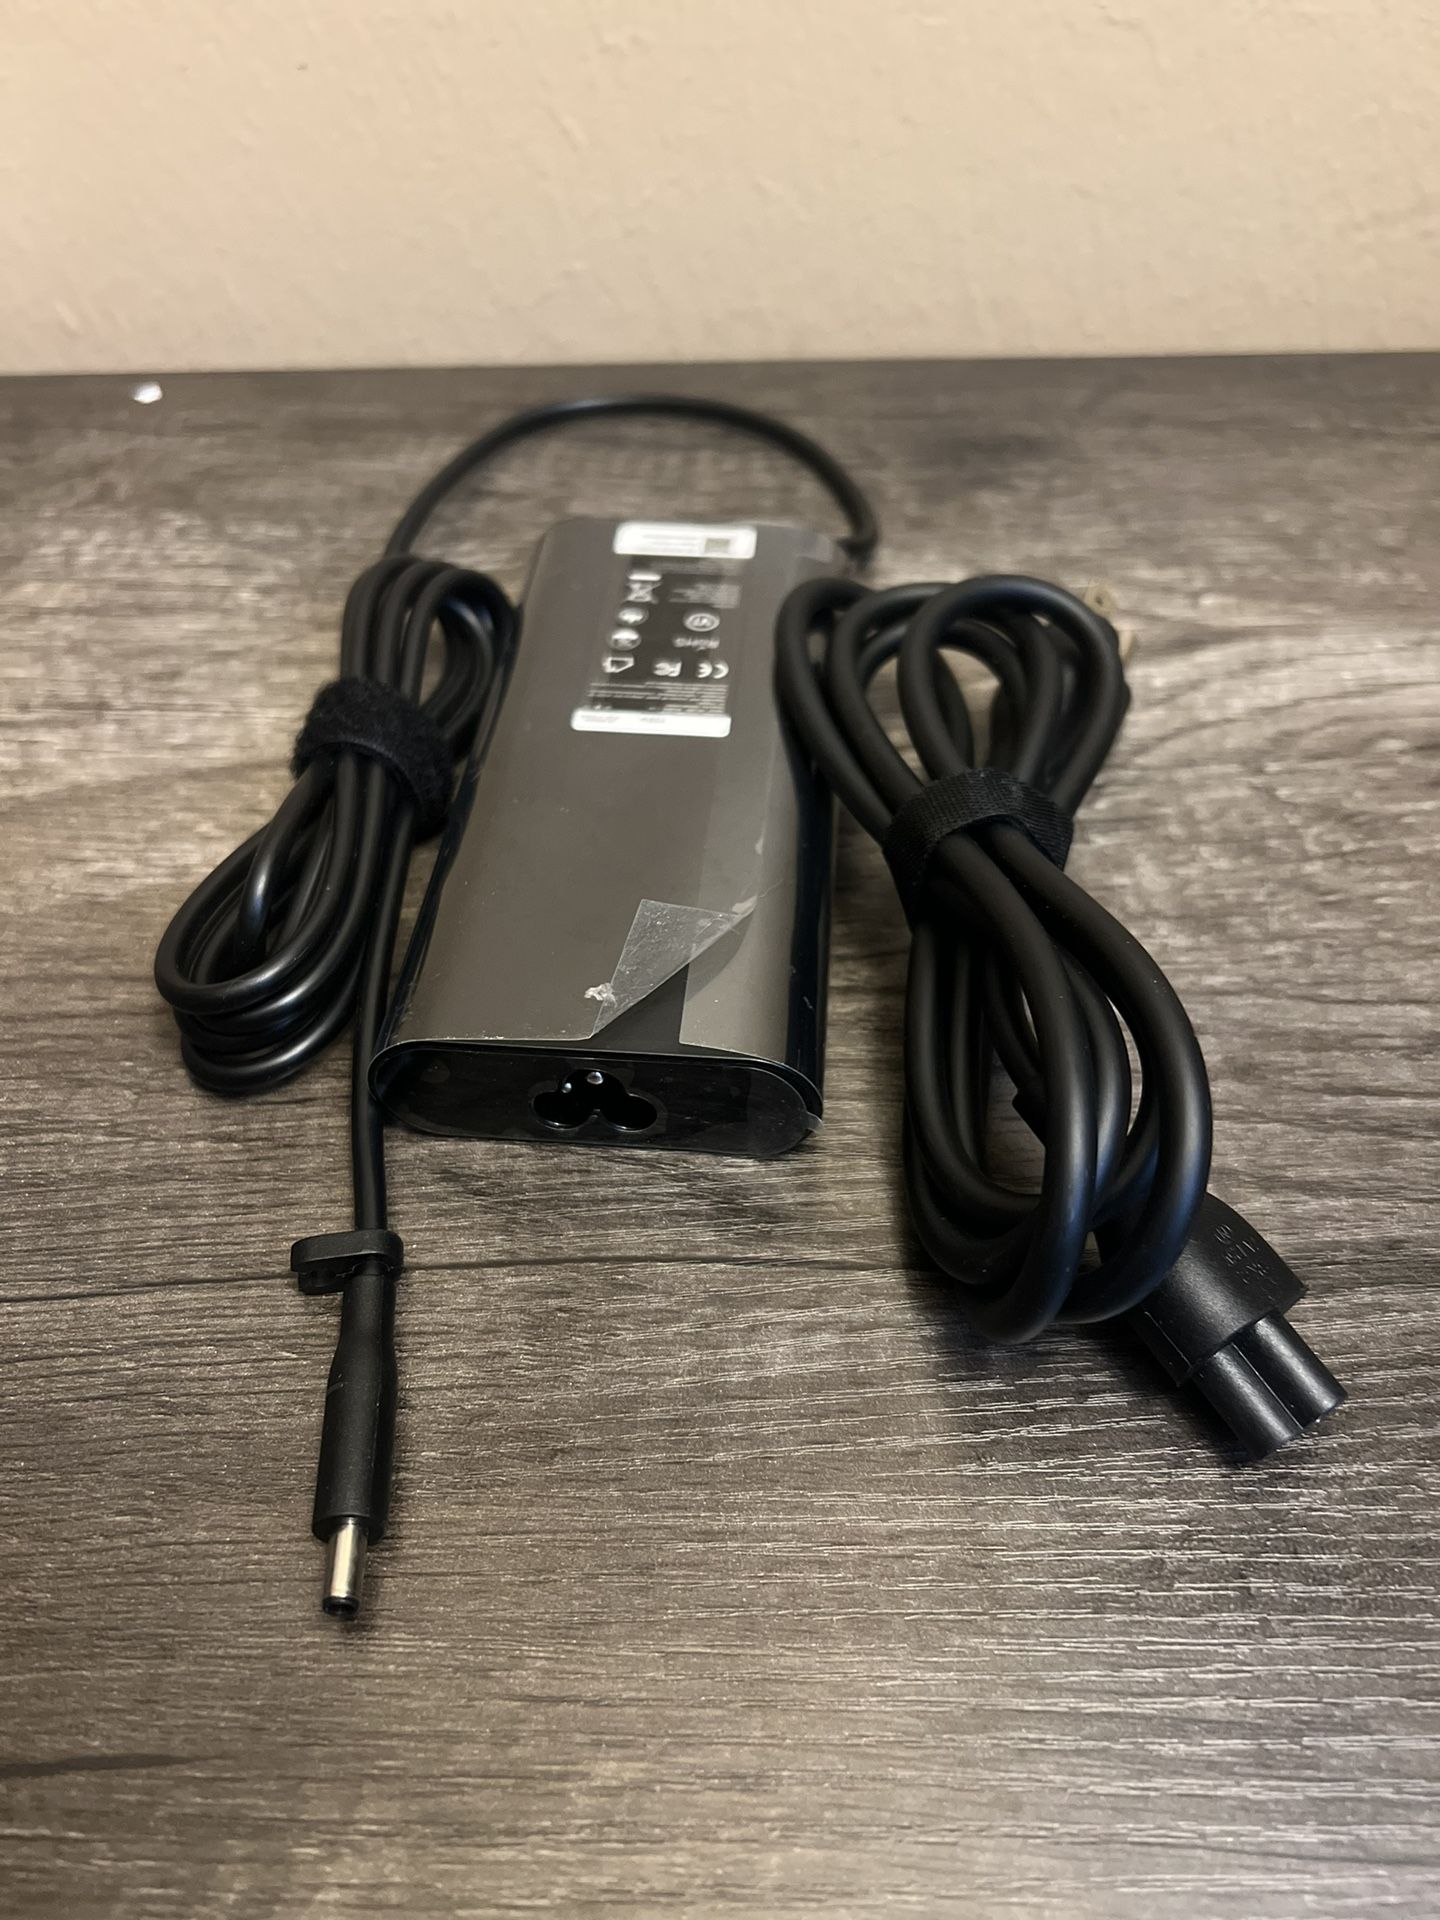 Black 130W AC Adapter Laptop For Dell XPS 15 7(contact info removed) NEW